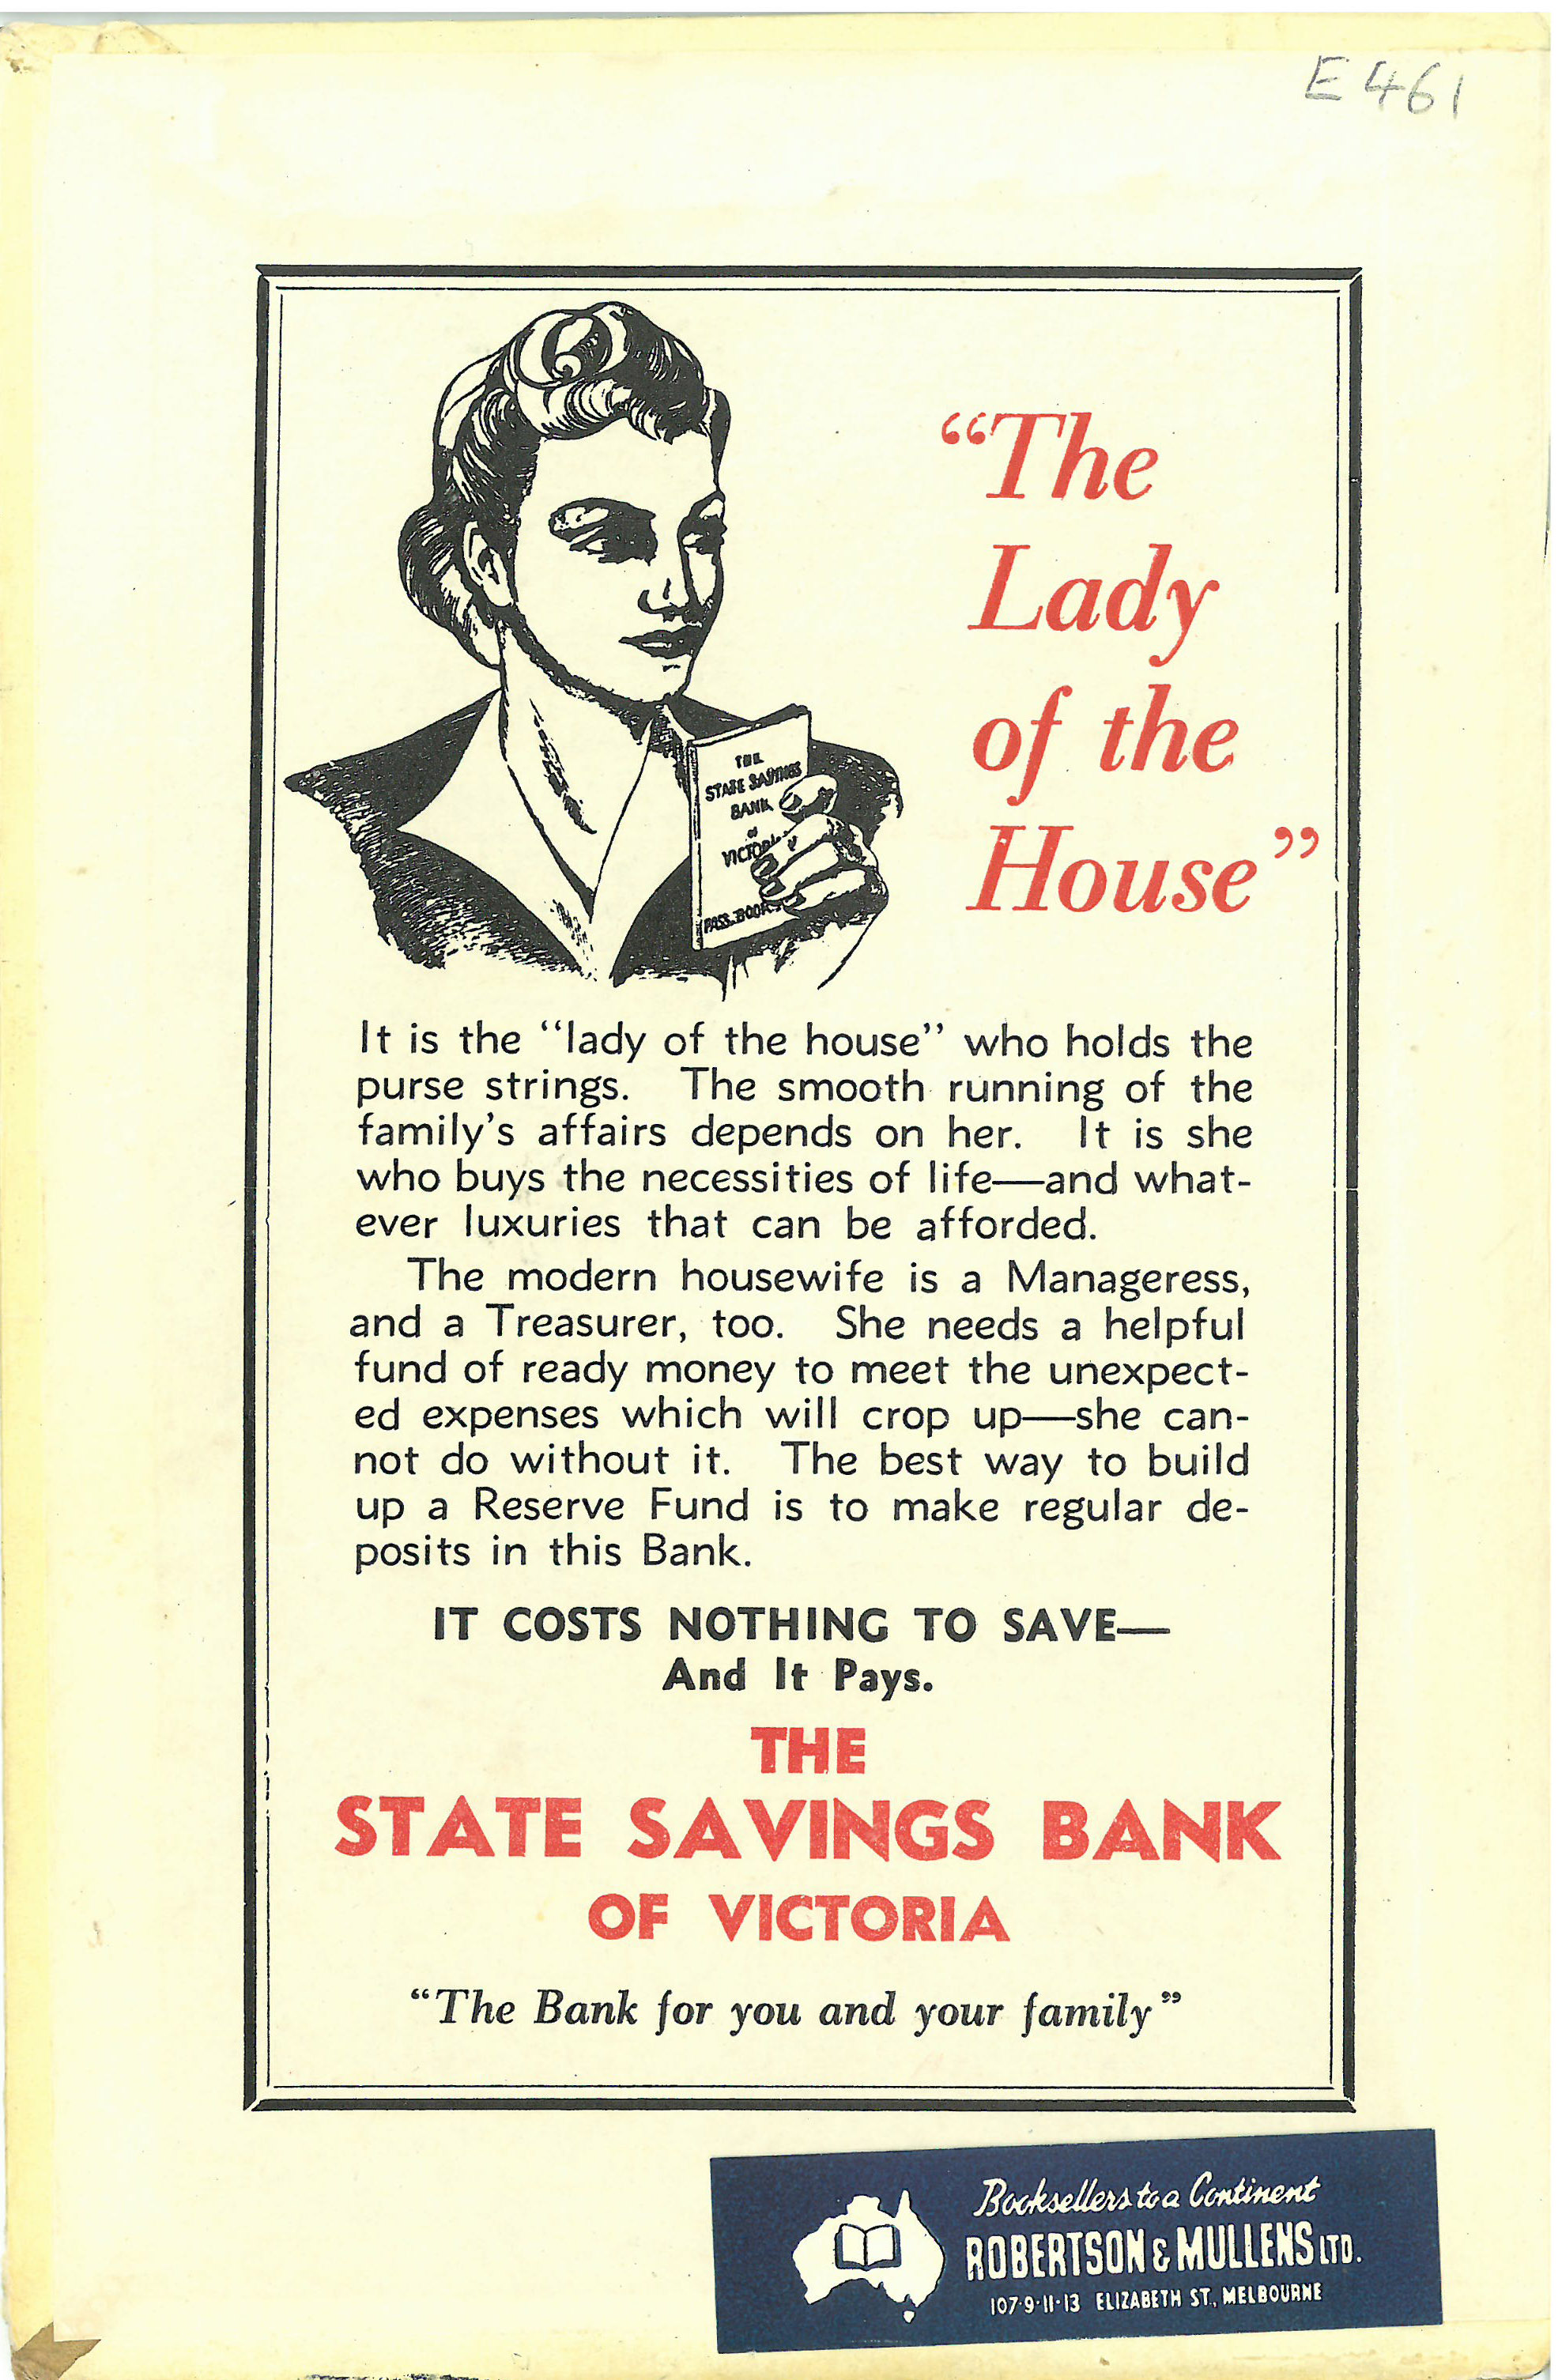 The back inside cover of the same book - including the State Savings Bank of Victoria' brand